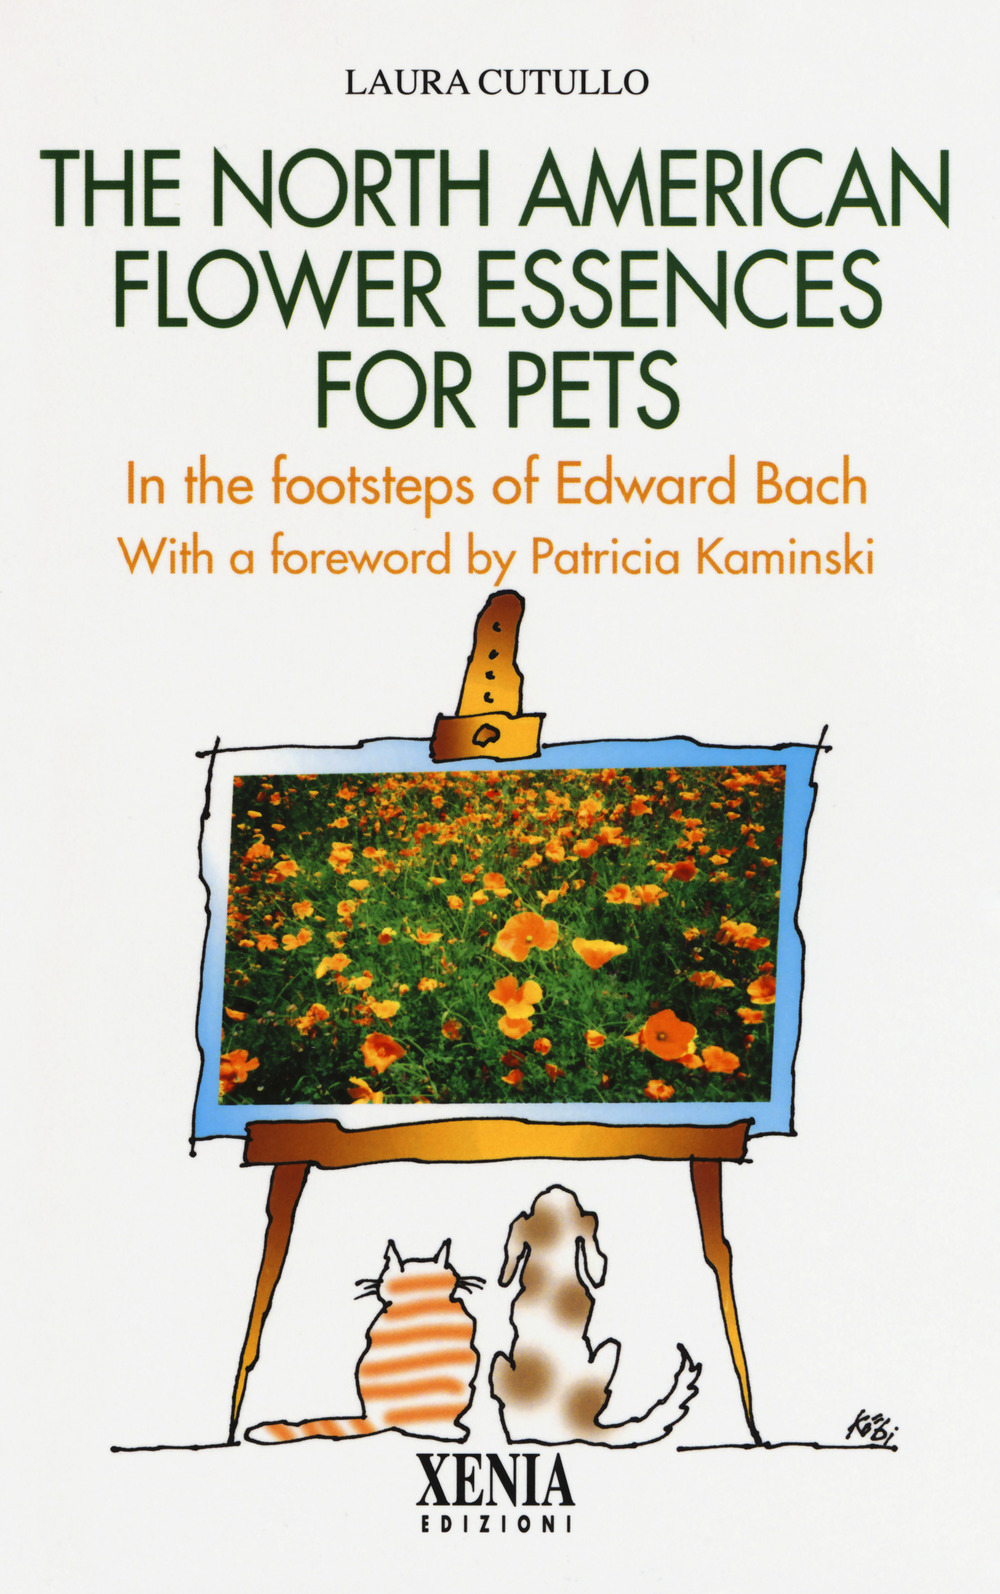 The north american flower essences for pets. In the footsteps of Edward Bach